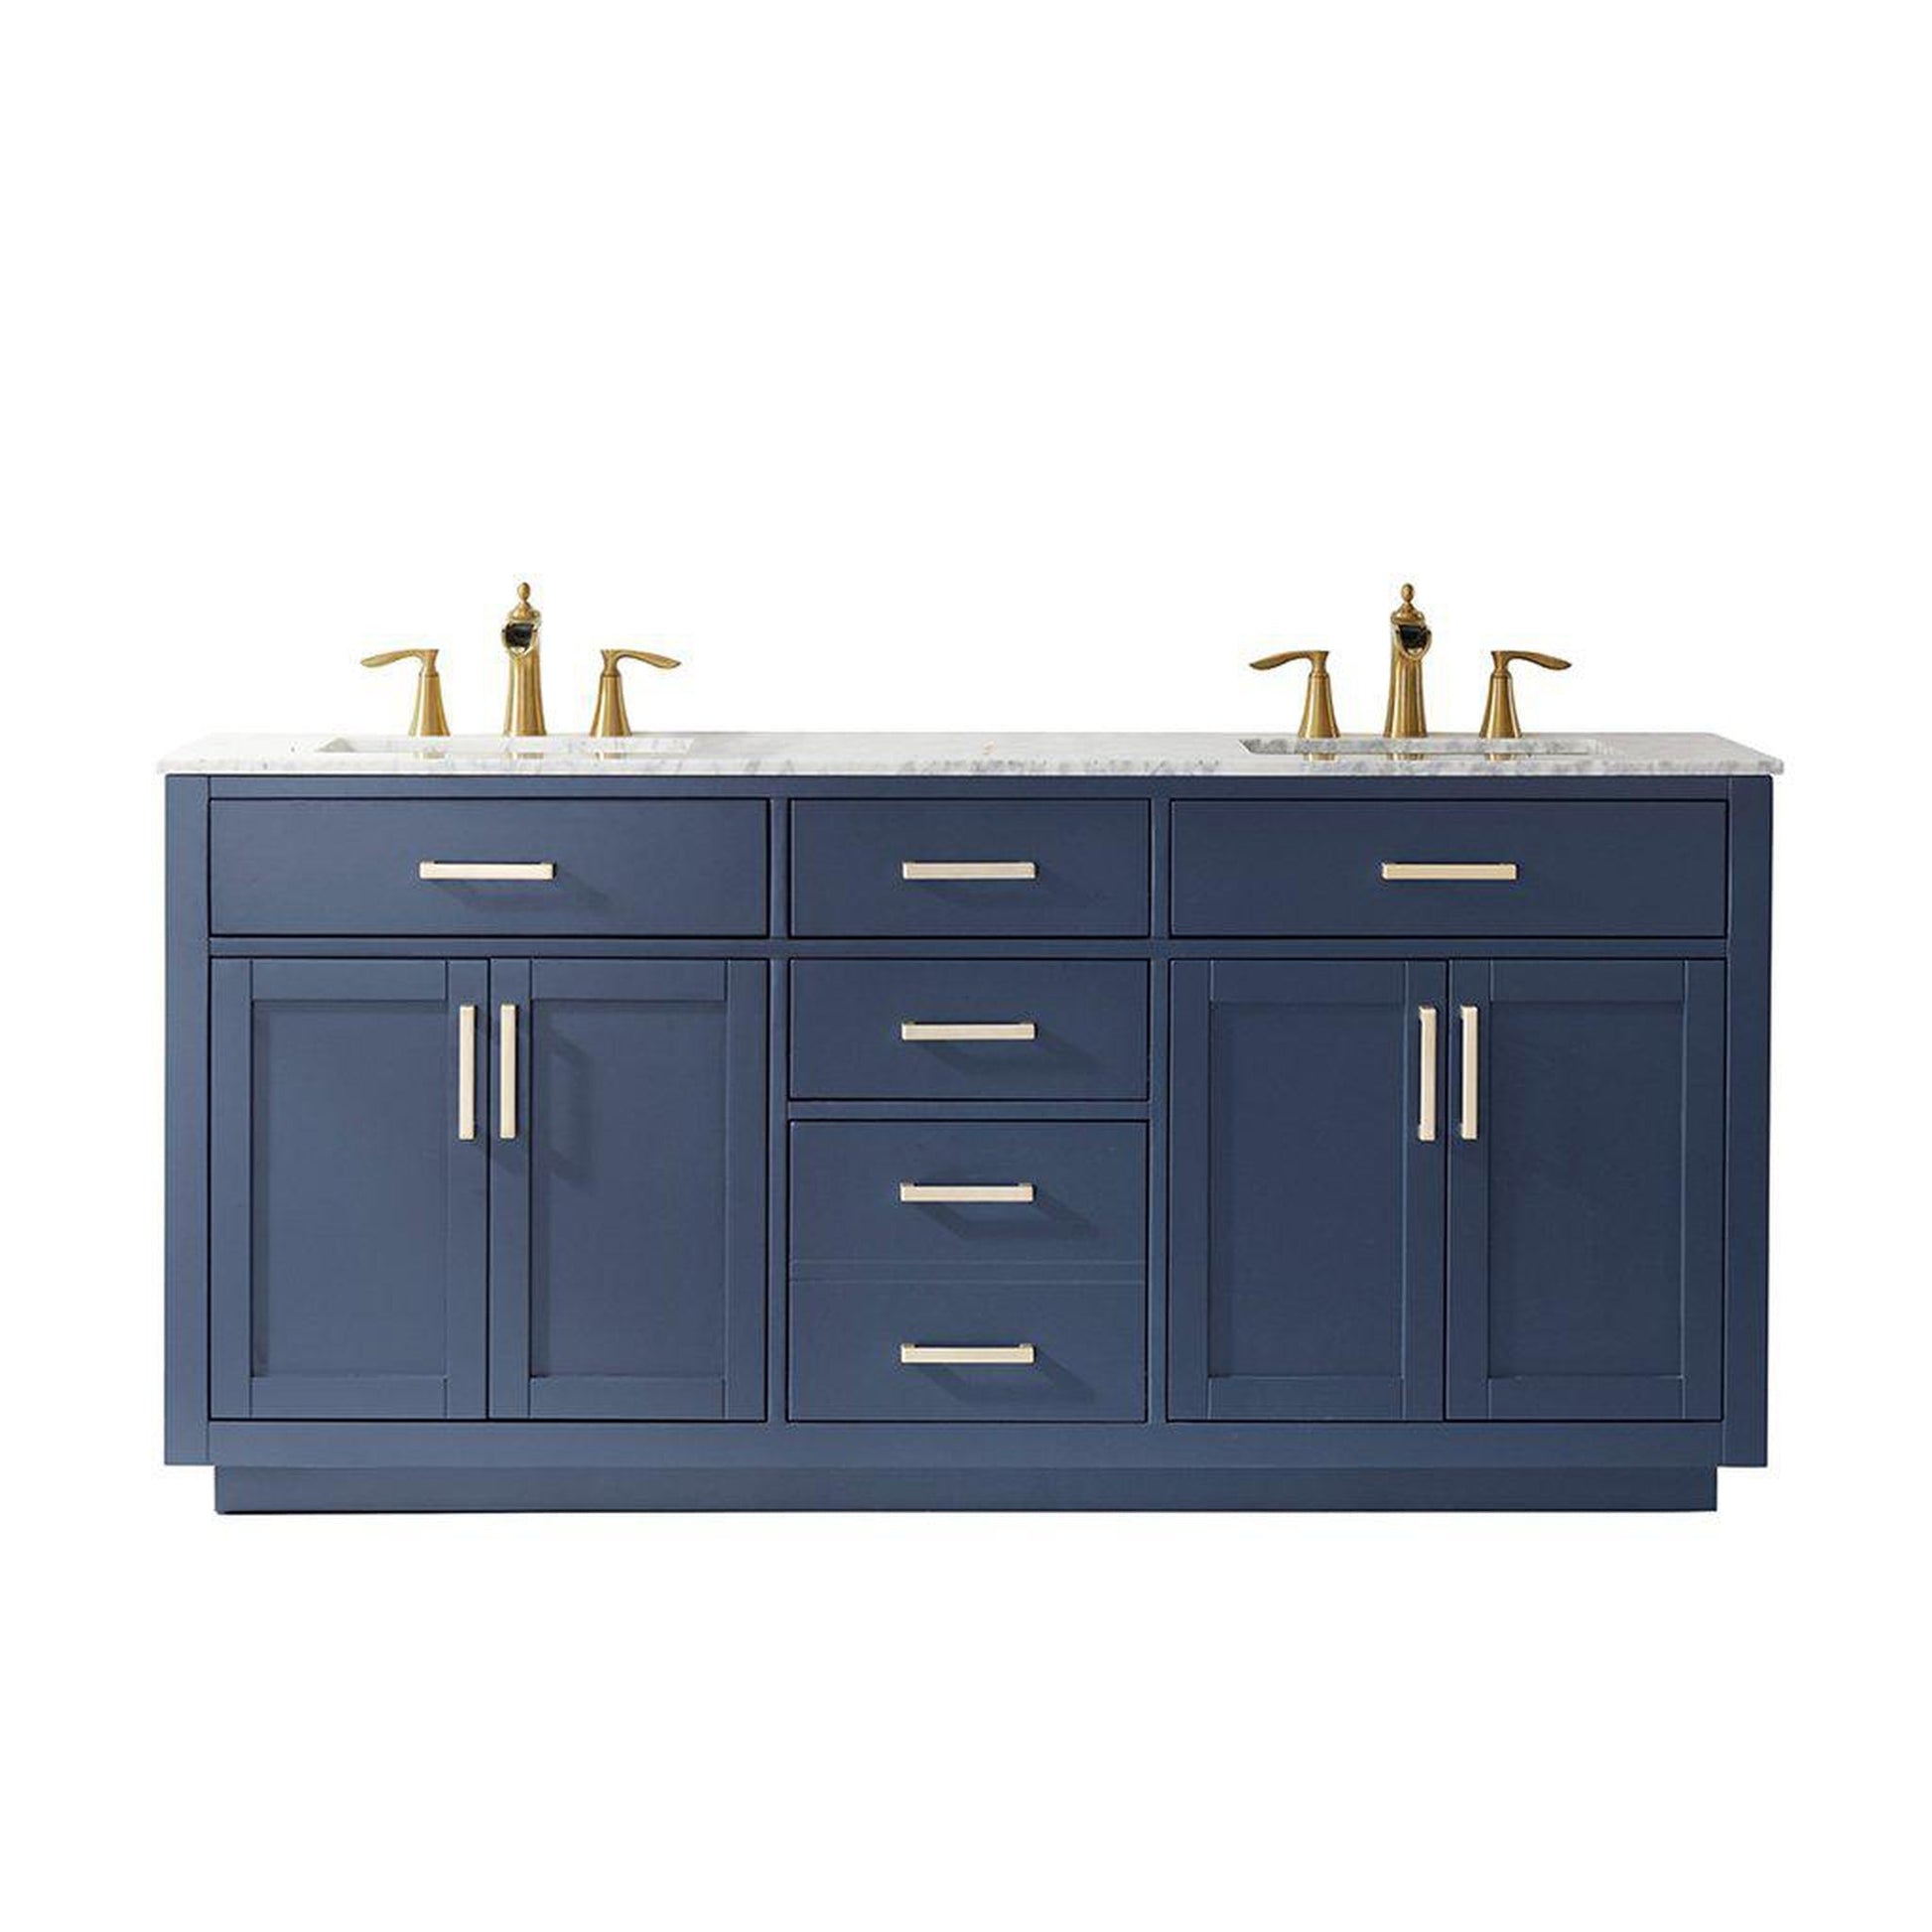 Altair Ivy 72" Double Royal Blue Freestanding Bathroom Vanity Set With Natural Carrara White Marble Top, Two Rectangular Undermount Ceramic Sinks, and Overflow